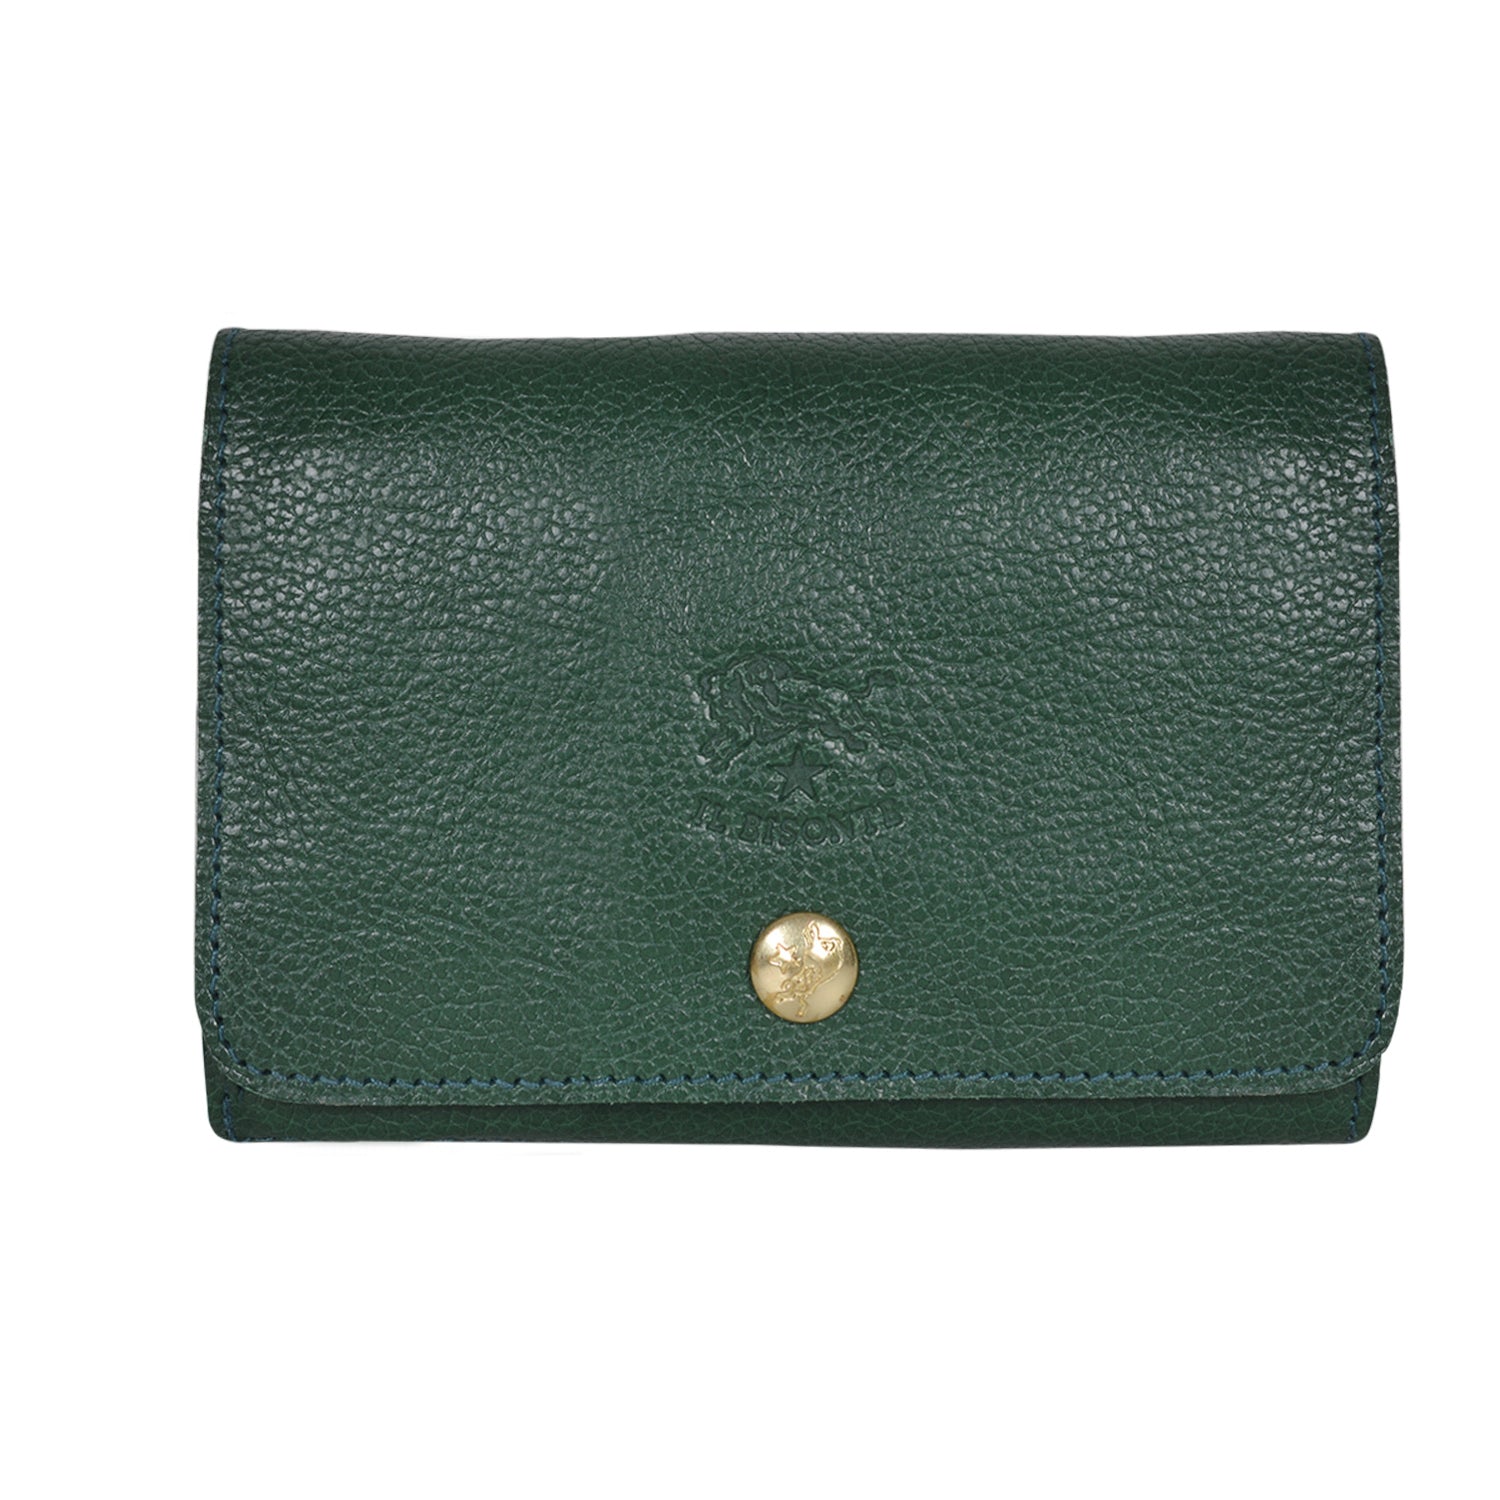 IL BISONTE UNISEX COMPACT FOLDING WALLET IN GREEN COWHIDE LEATHER